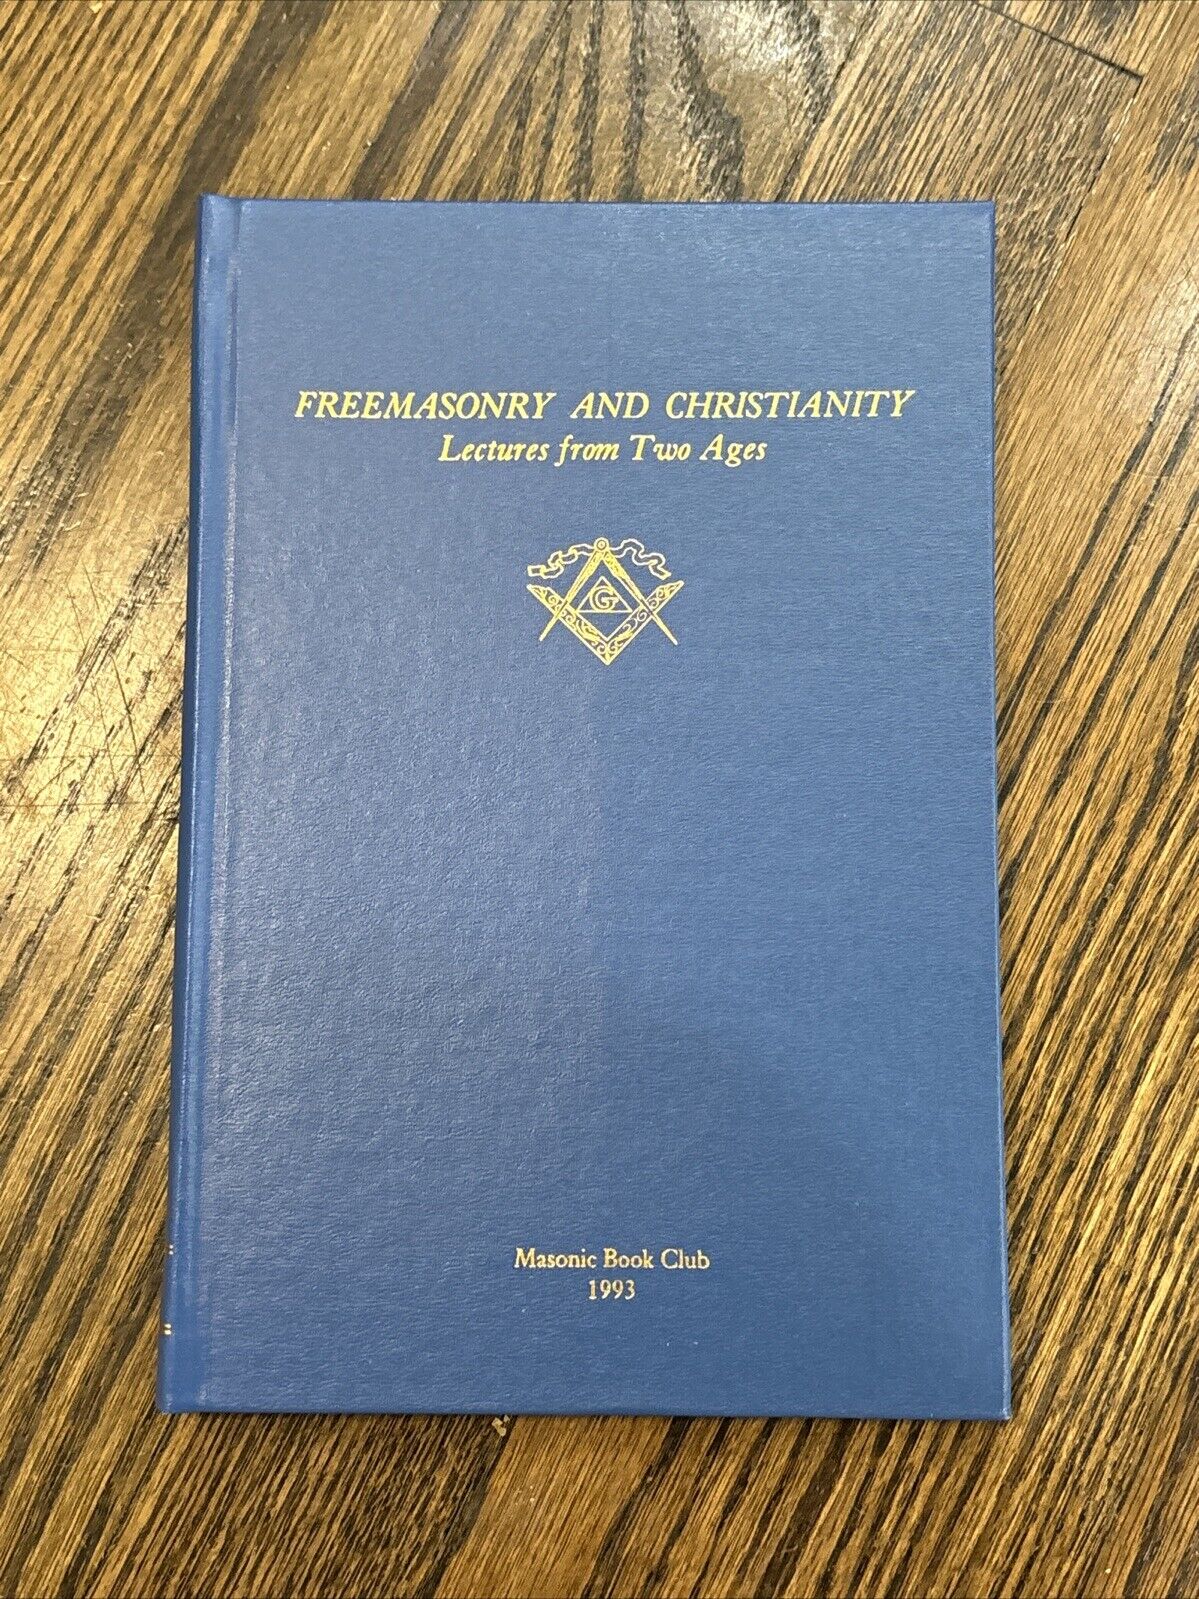 1993 Freemasonry And Christianity Lectures from Two Ages Masonic Book Club